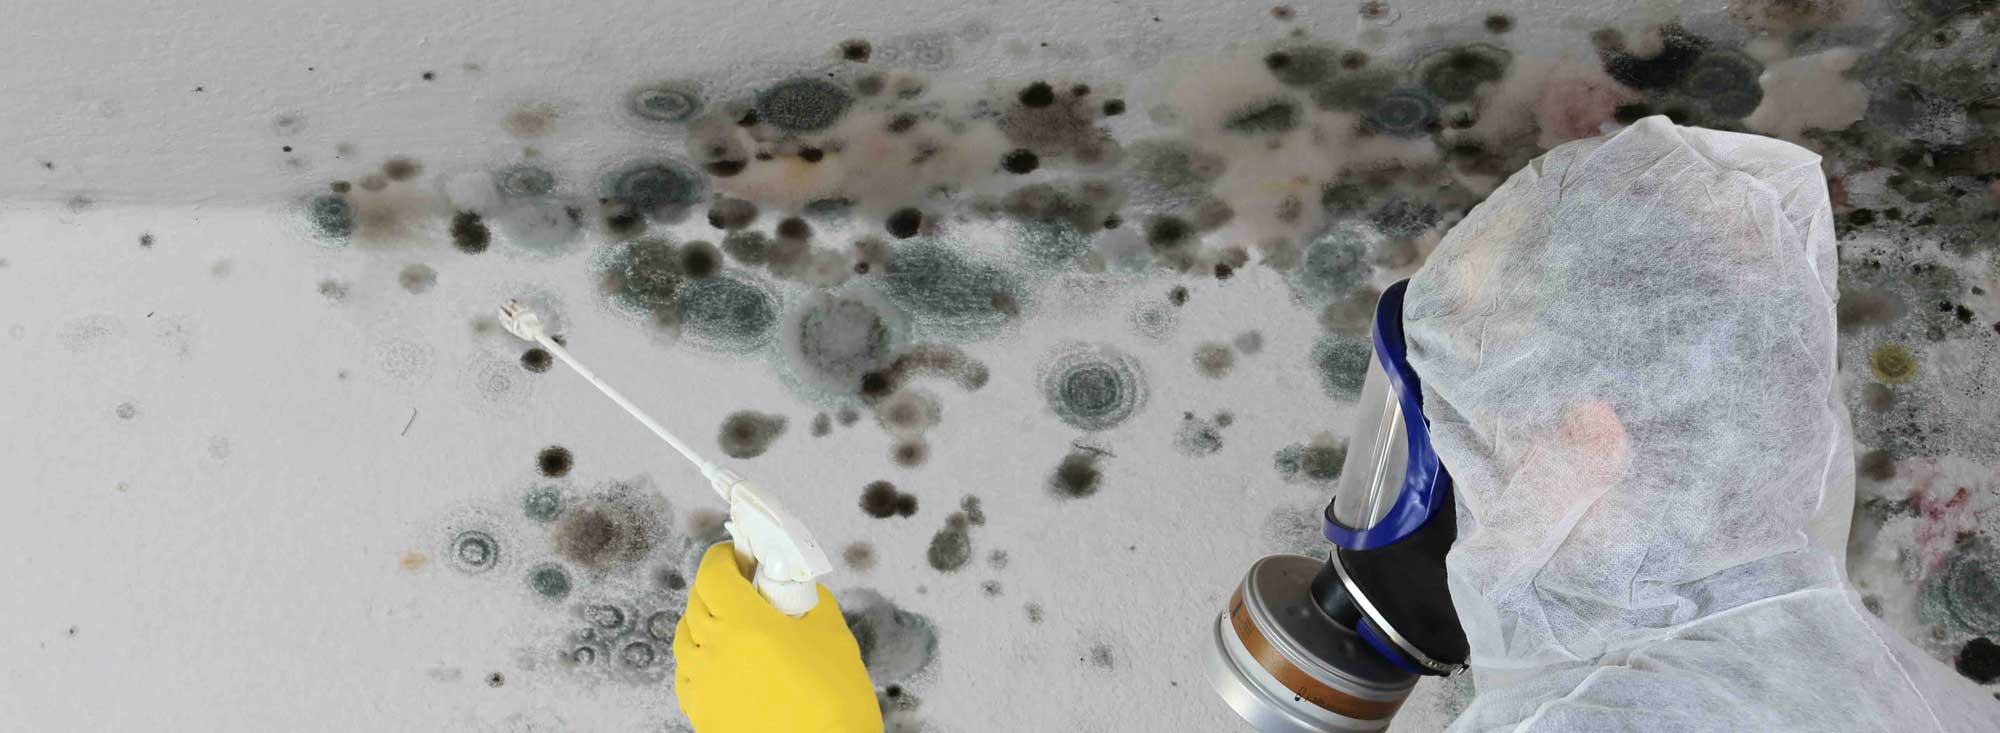 Mould-Removal-Company-Sussex-London